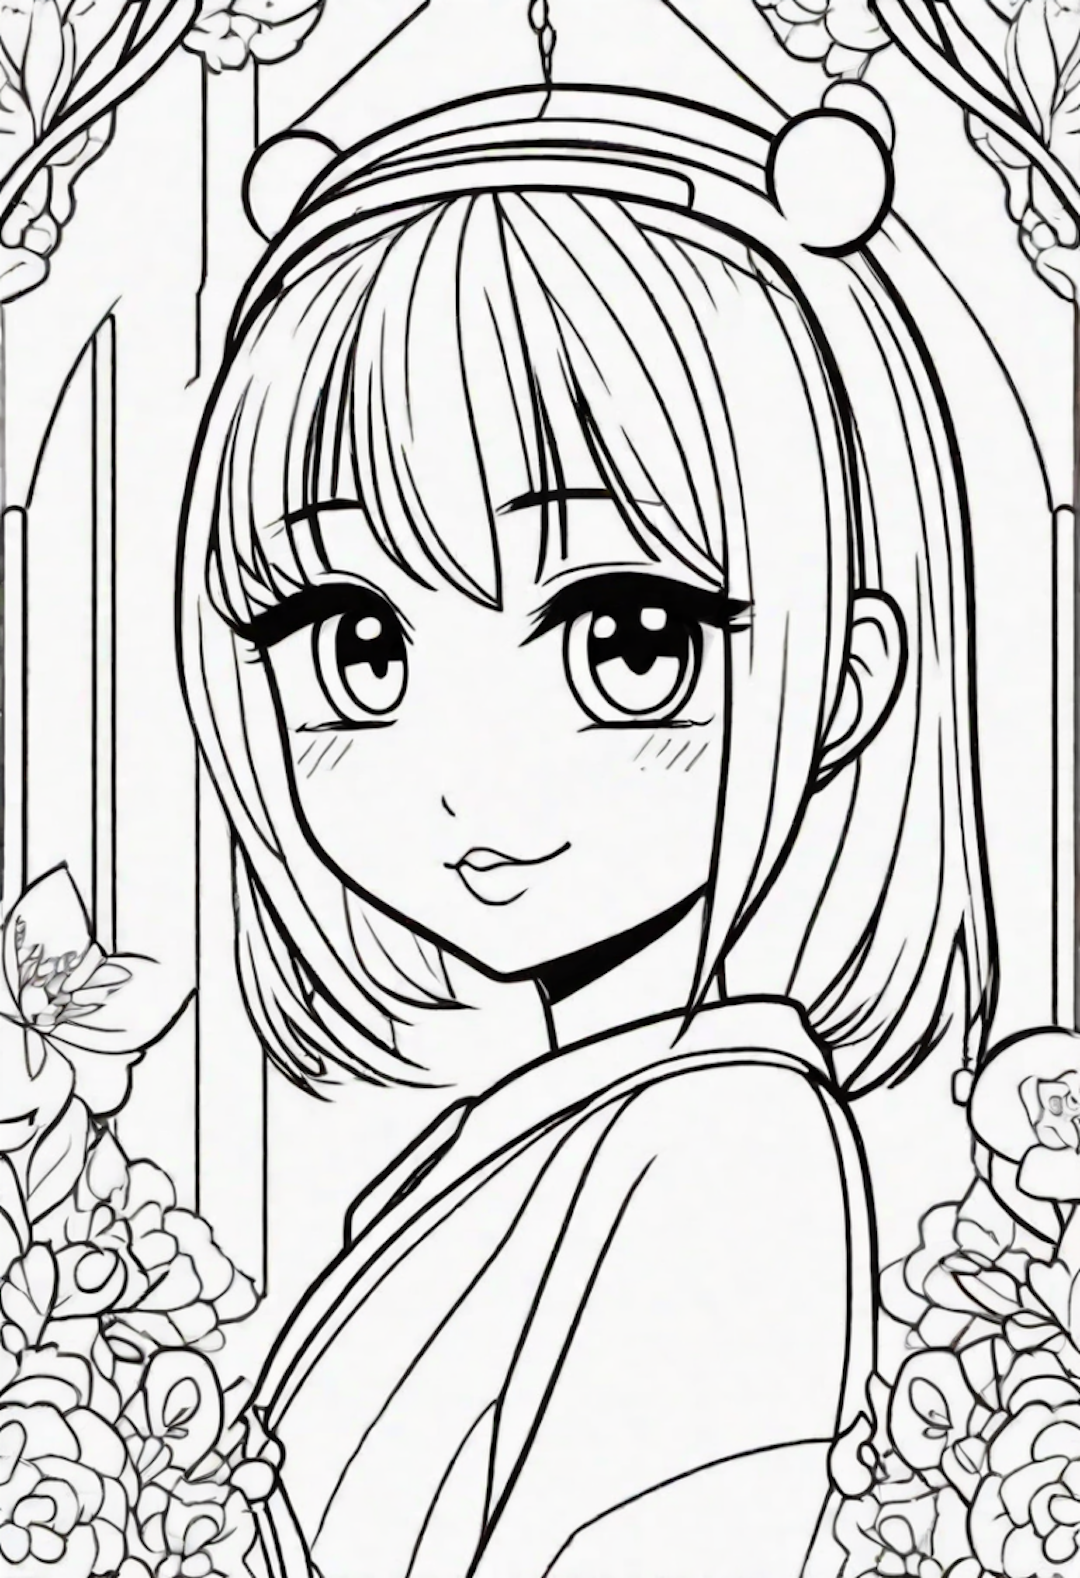 Anime Girl in a Flower Garden Coloring Page coloring pages